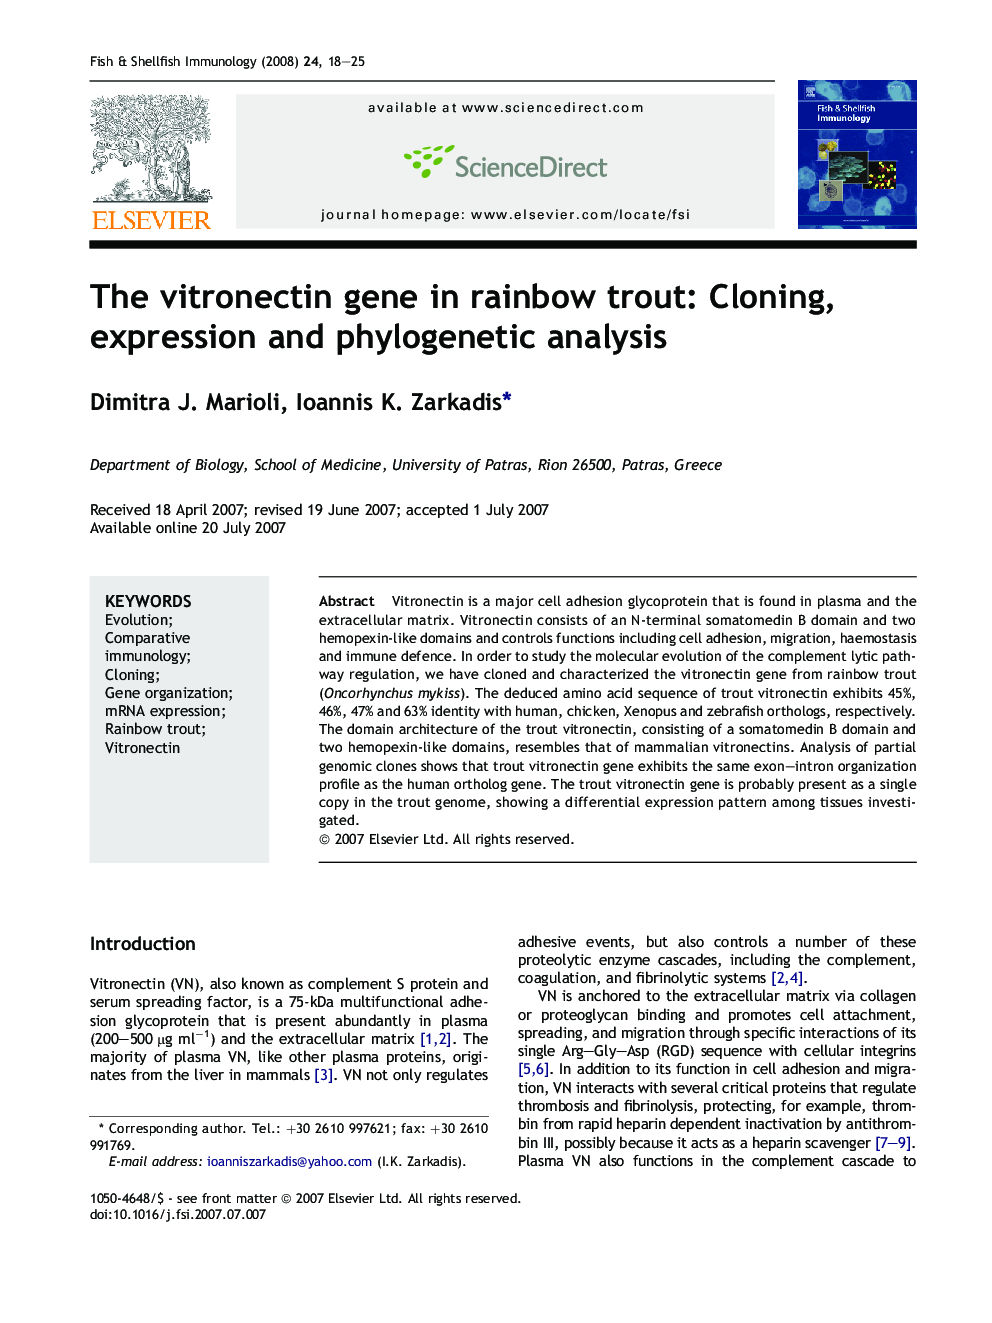 The vitronectin gene in rainbow trout: Cloning, expression and phylogenetic analysis